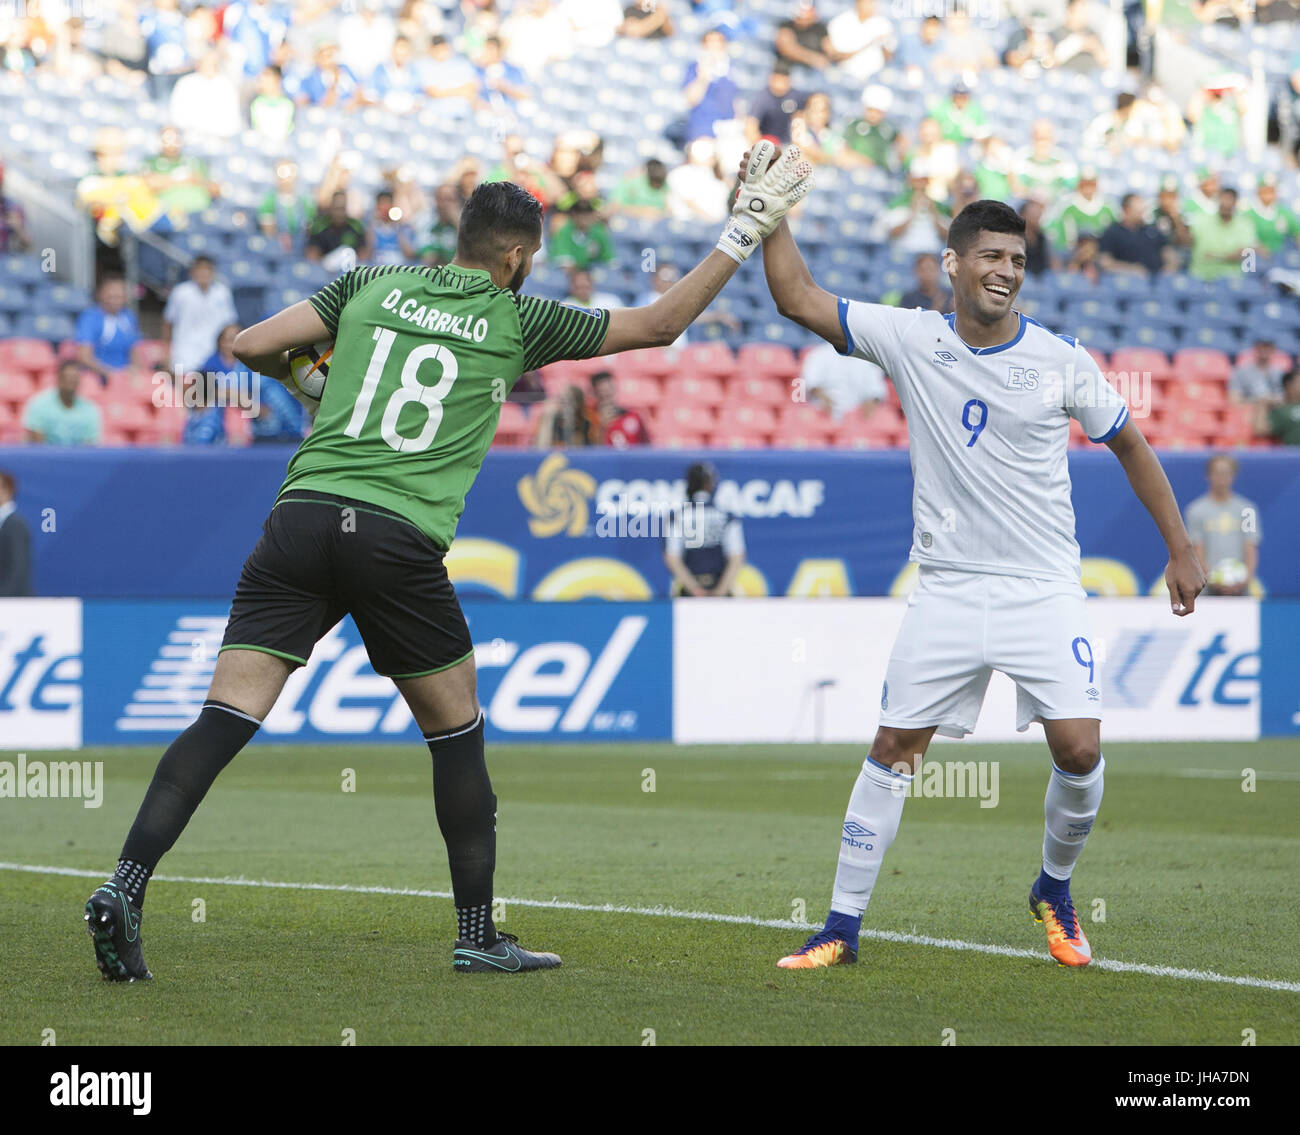 Denver, Colorado, USA. 13th July, 2017. El Salvador G DERBY CARRILLO, left, high fives F NELSON BONILLA, right, after making a save off a penalty kick during the 1st. Half at Sports Authority Field at Mile High during the CONCACAF Gold Cup tournament Thursday night. El Salvador beats Curacao 2-0. Credit: Hector Acevedo/ZUMA Wire/Alamy Live News Stock Photo